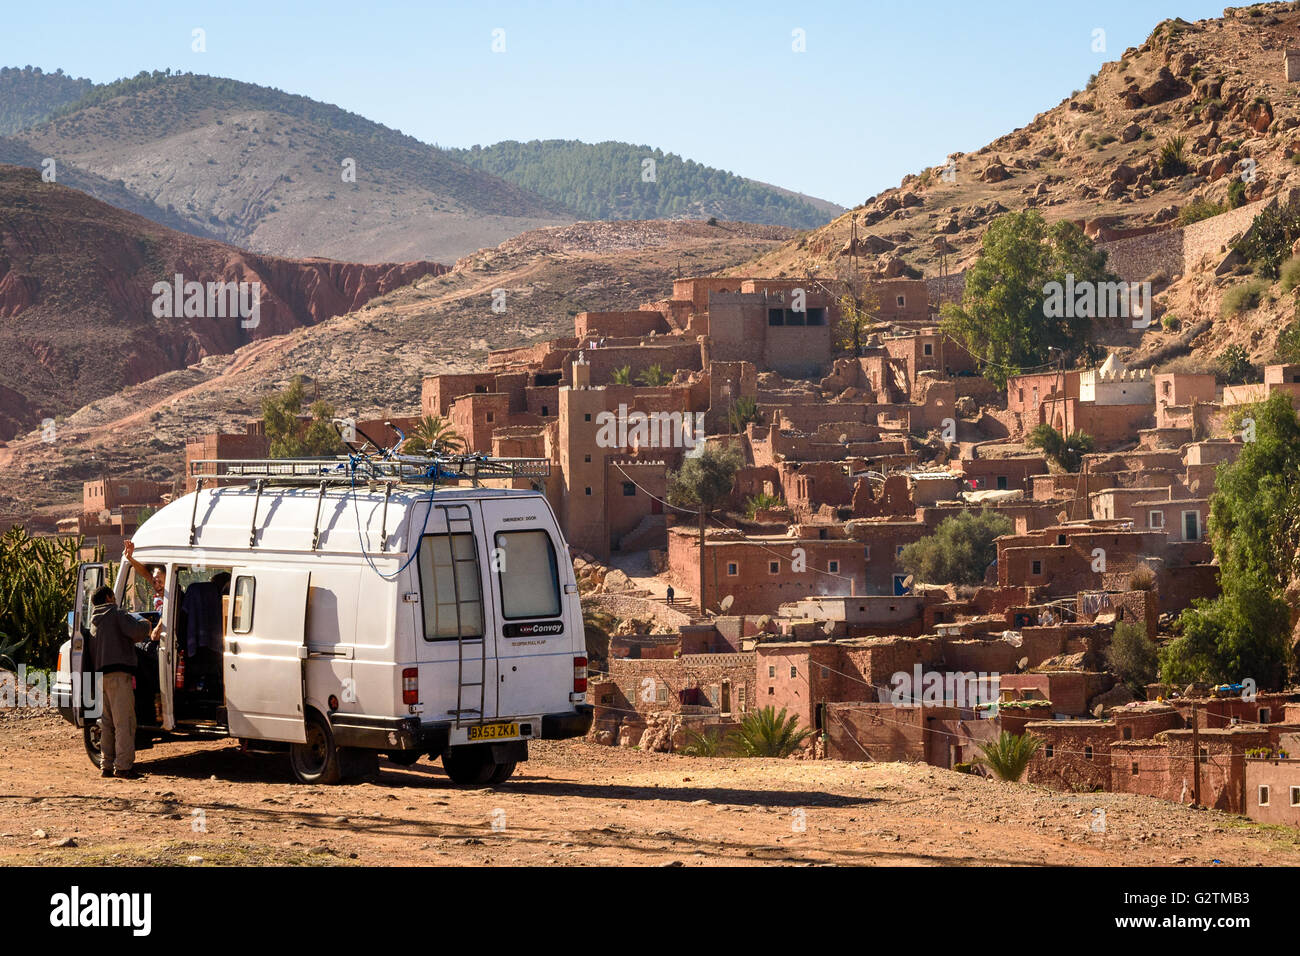 Campervan in front of old Kasbah, Morocco Stock Photo